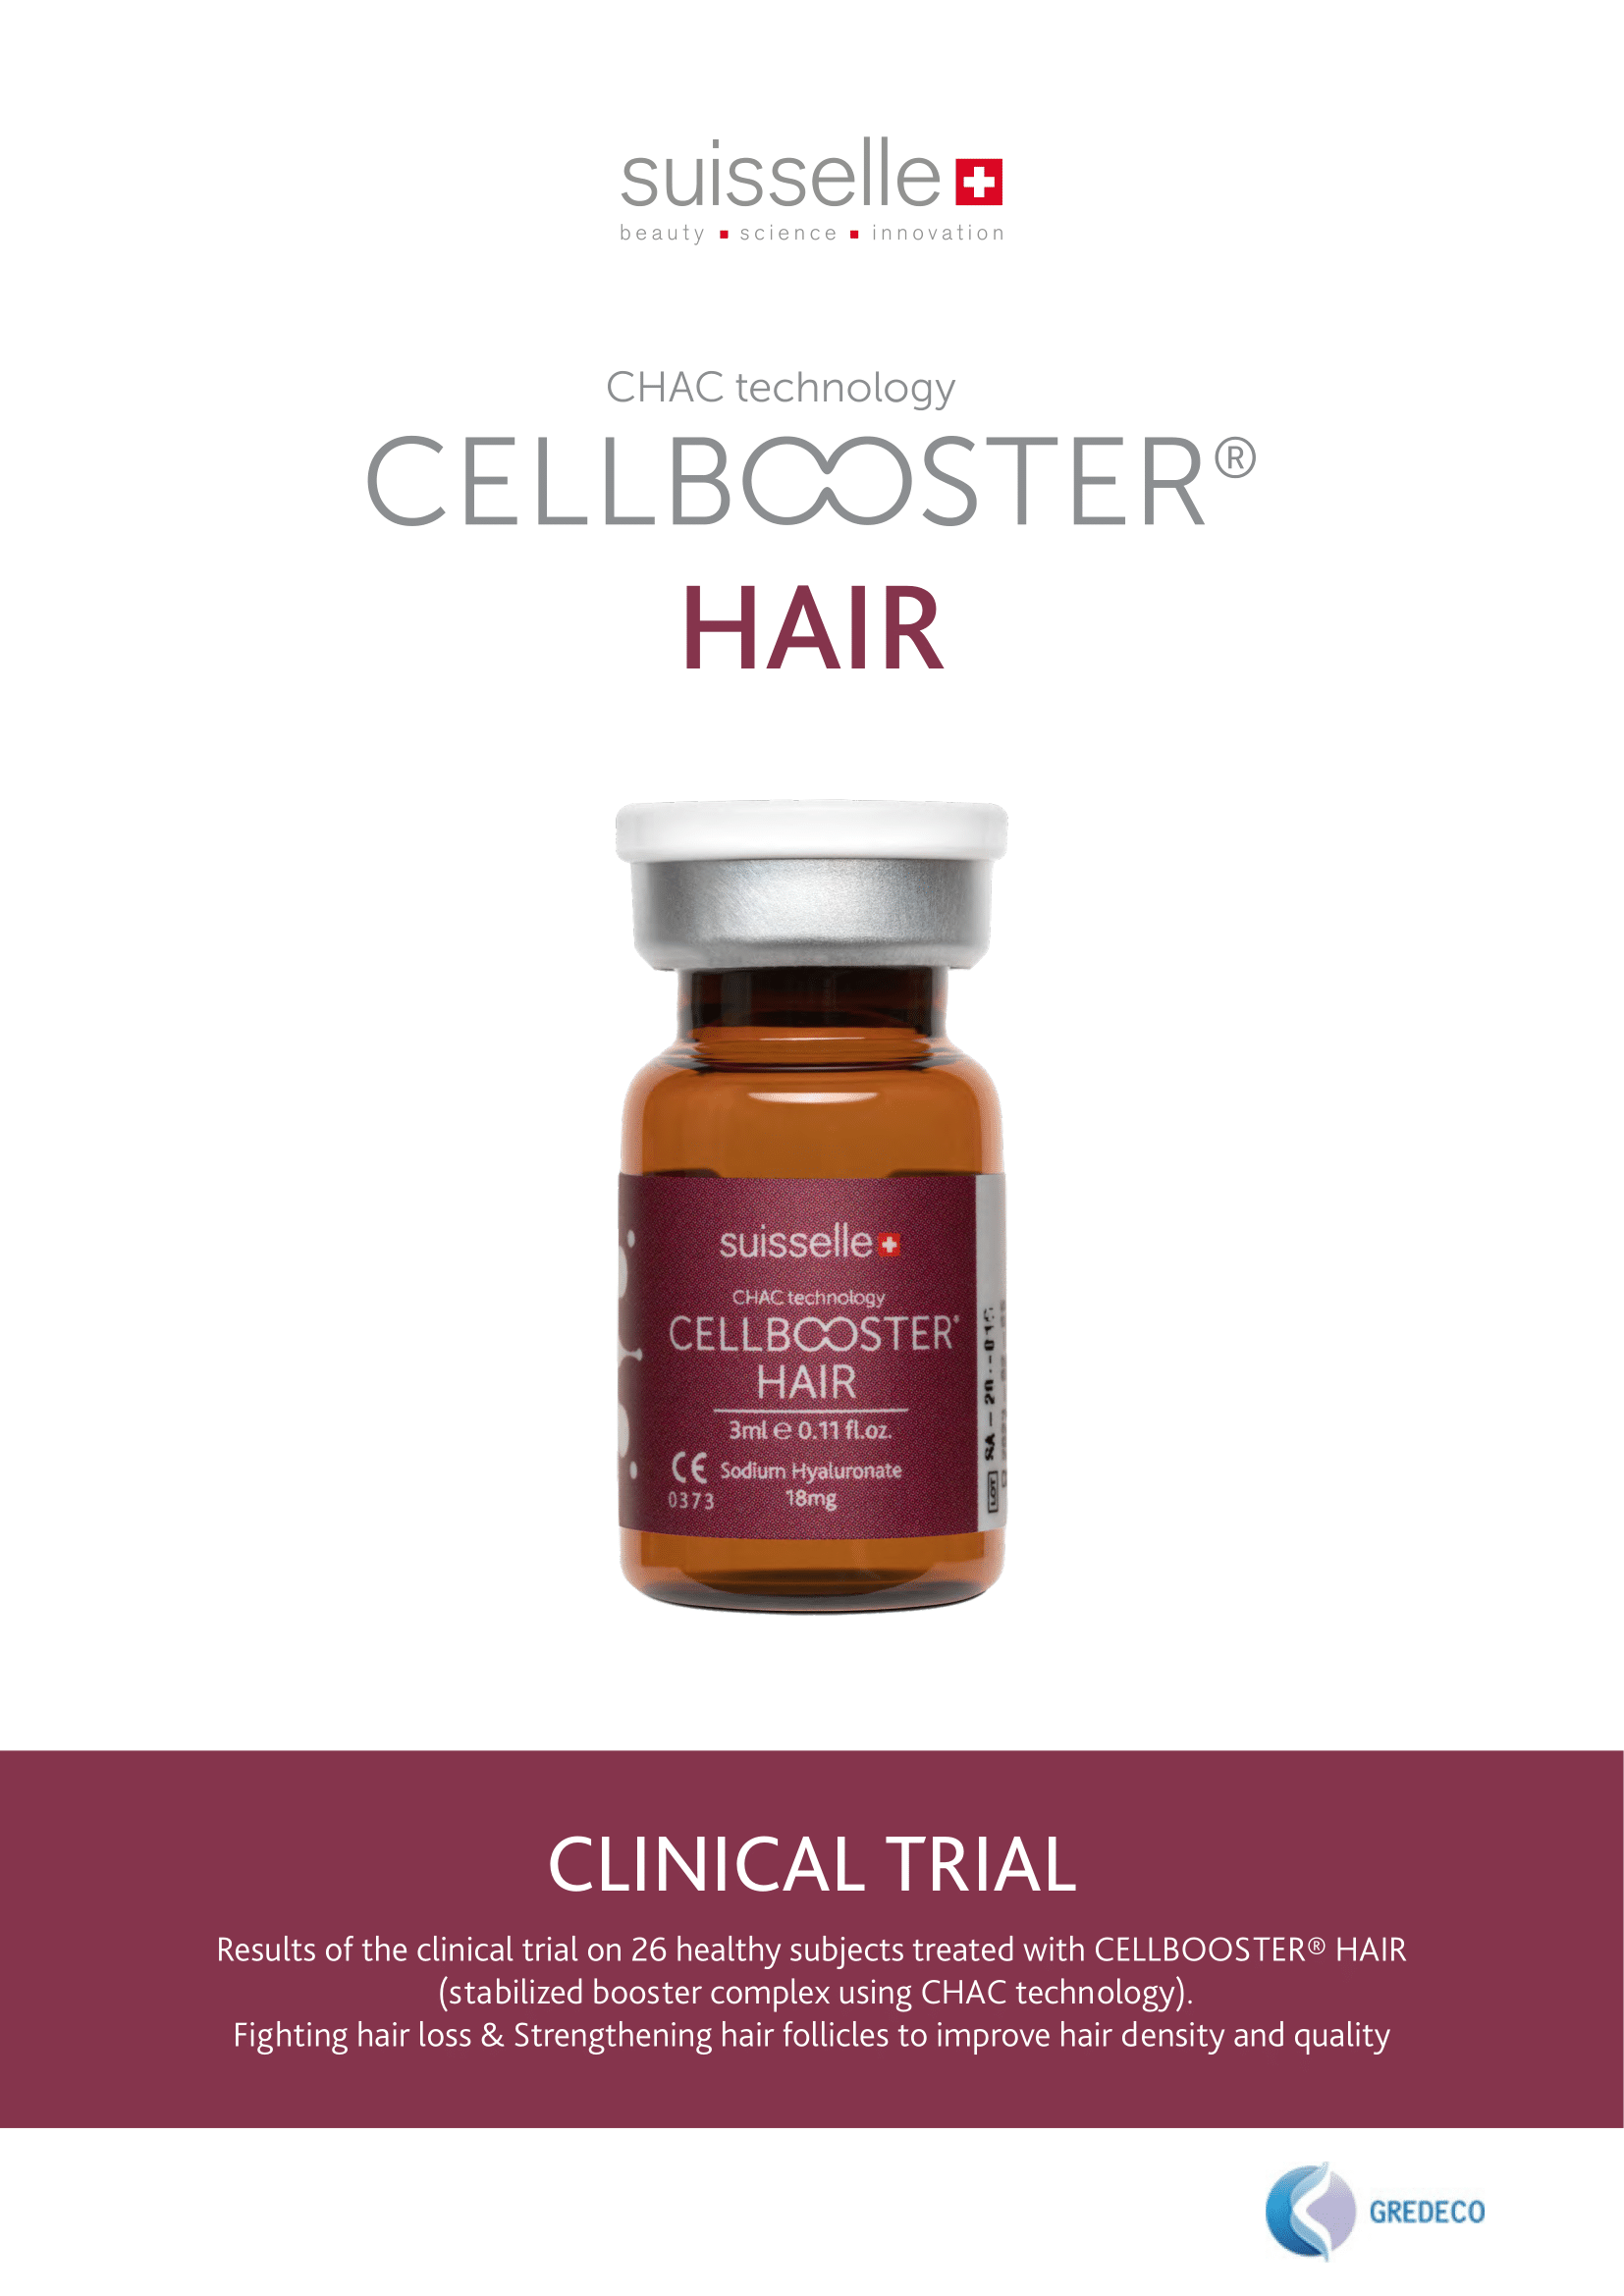 CELLBOOSTER® HAIR: Results of the clinical trial on 26 healthy subjects treated with CELLBOOSTER® HAIR. Fighting hair loss & Strengthening hair follicles to improve hair density and quality. Study by GREDECO.